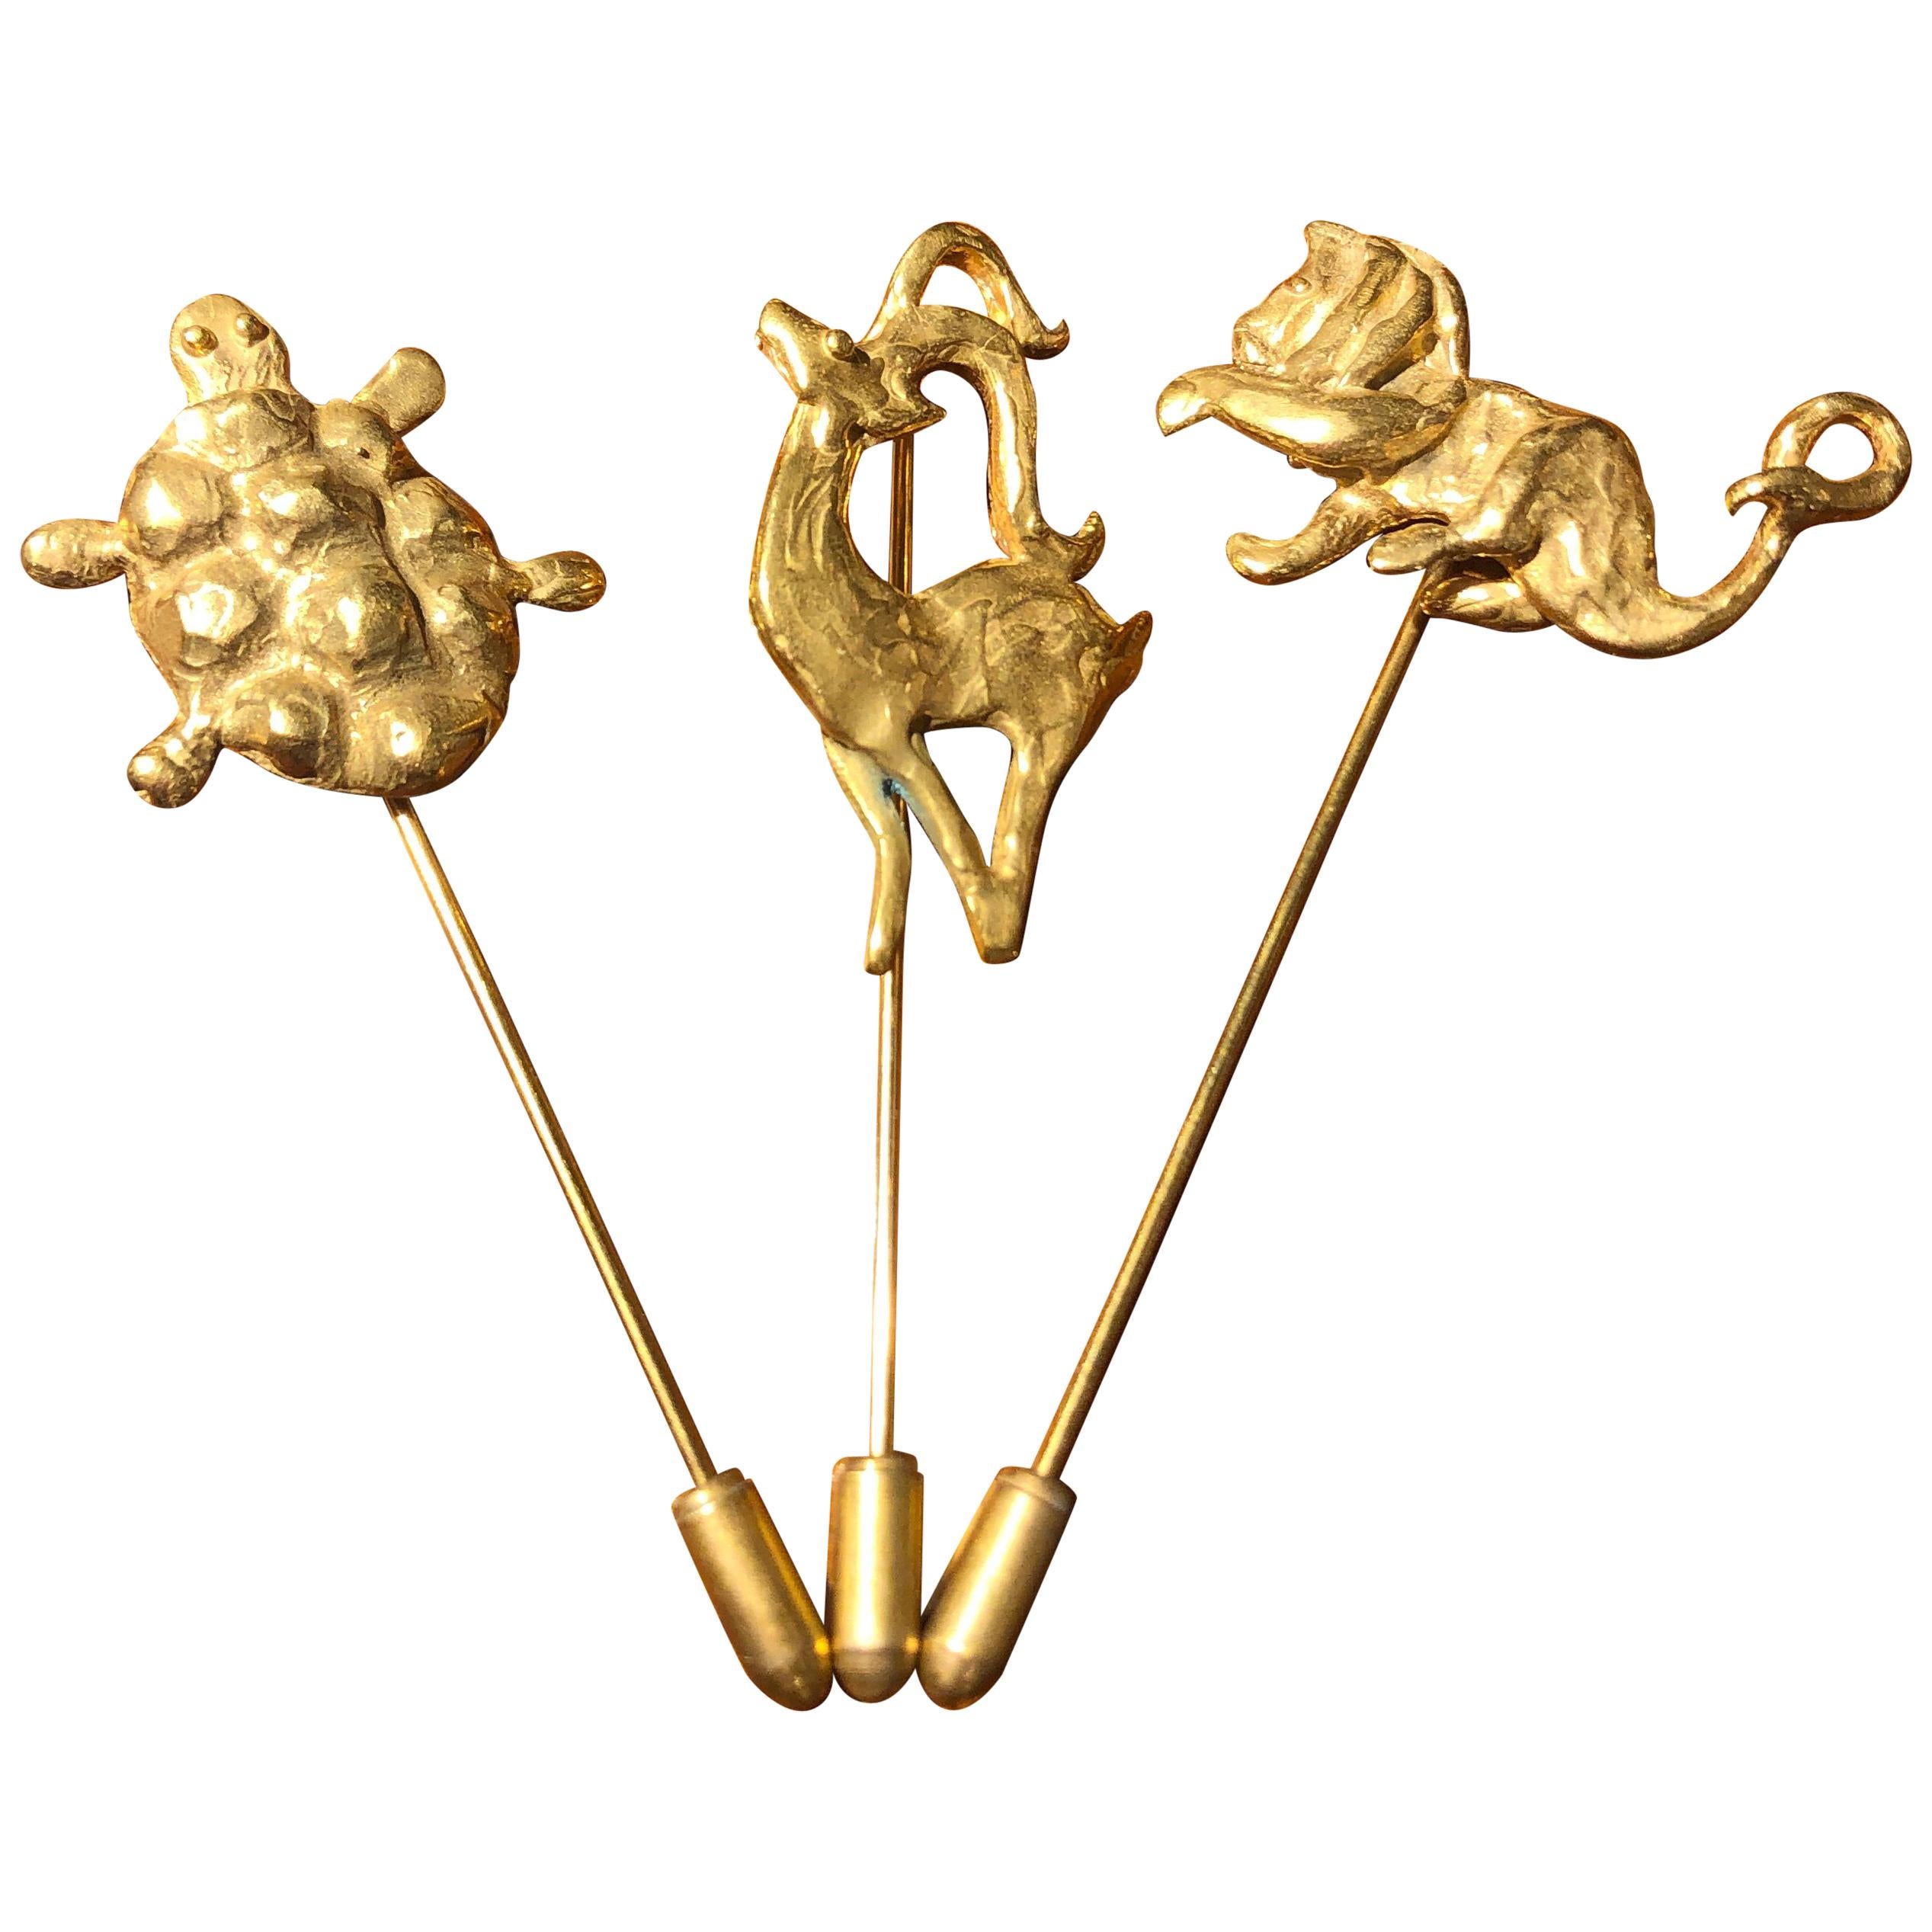 Gold-Plated Bronze "Animal" Brooches by Franck Evennou, France, 2018 For Sale